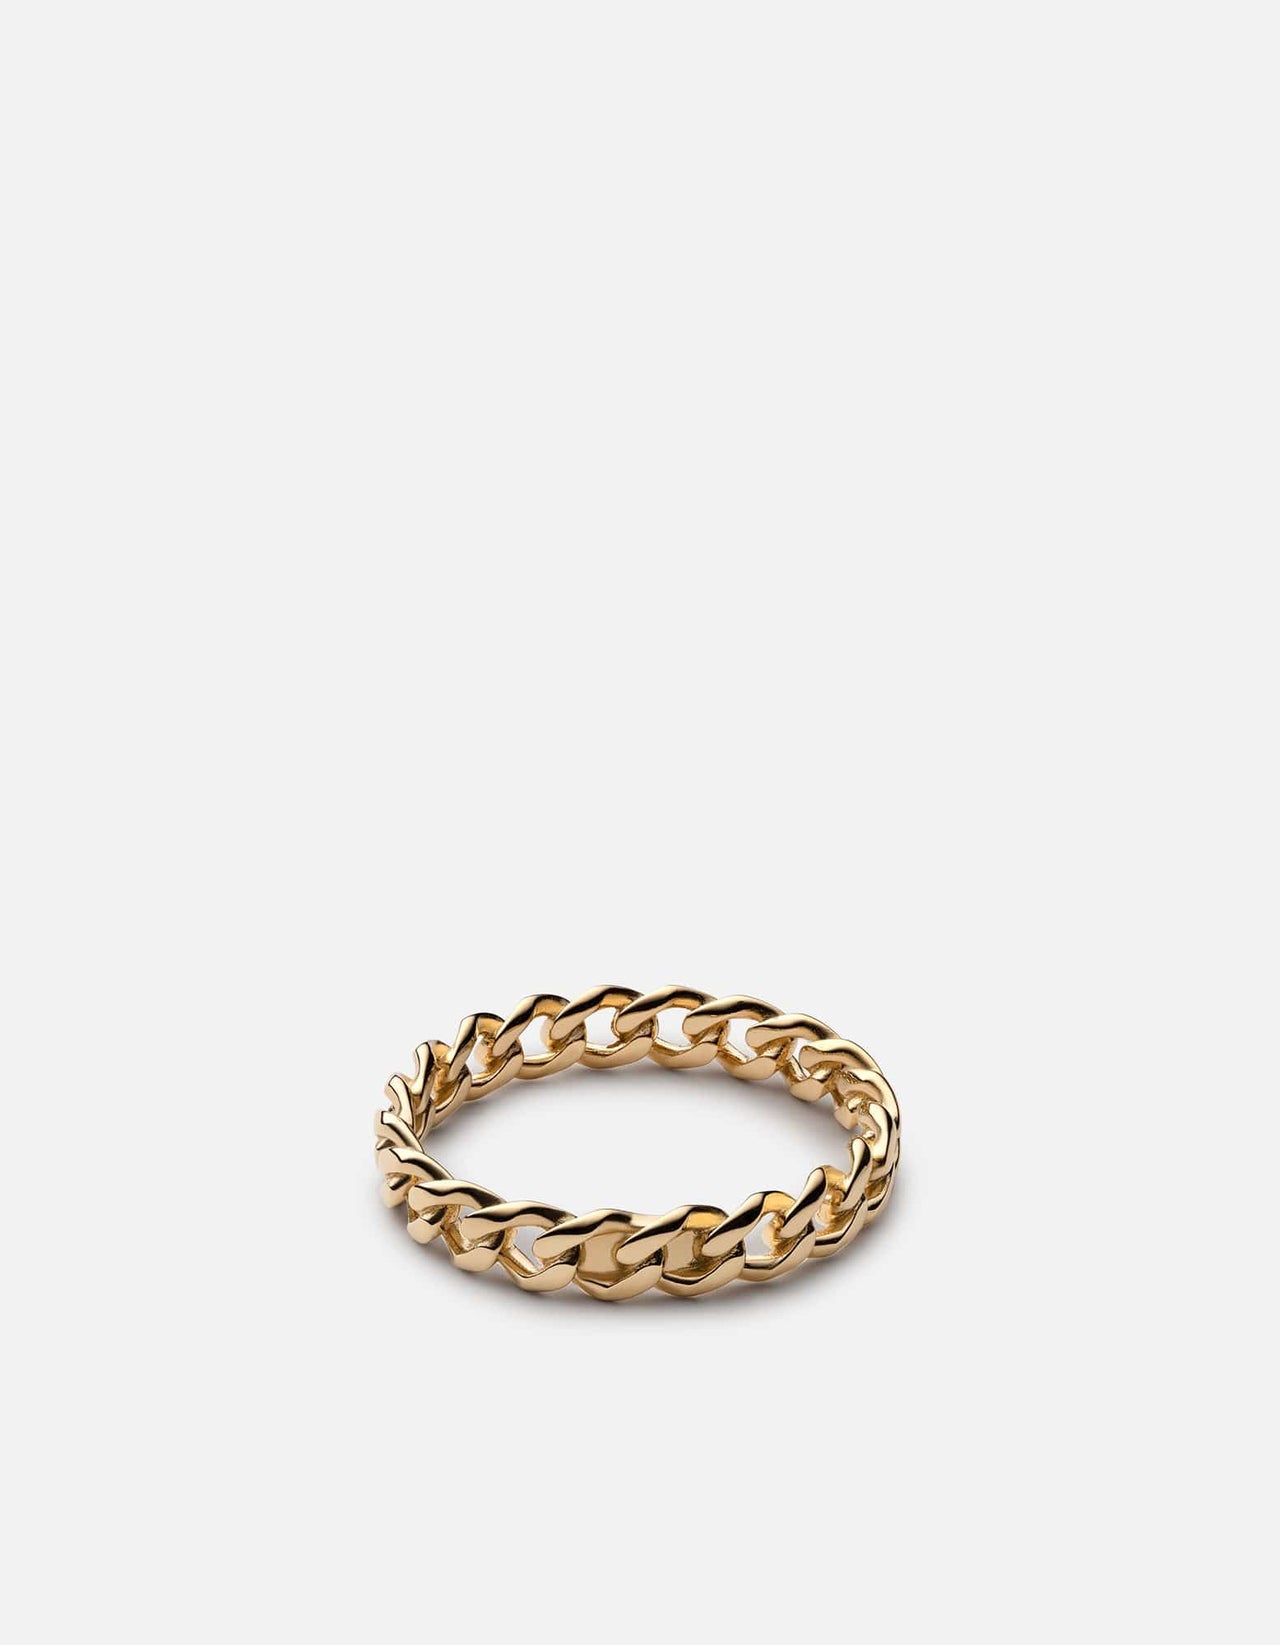 Gold Chain Ring - Cuban Link Ring - Gold Stacking Ring - Bold Ring - Gold  Statement Ring - Minimalist Ring - Dainty Ring - Gemstone Ring – FALA  Jewelry